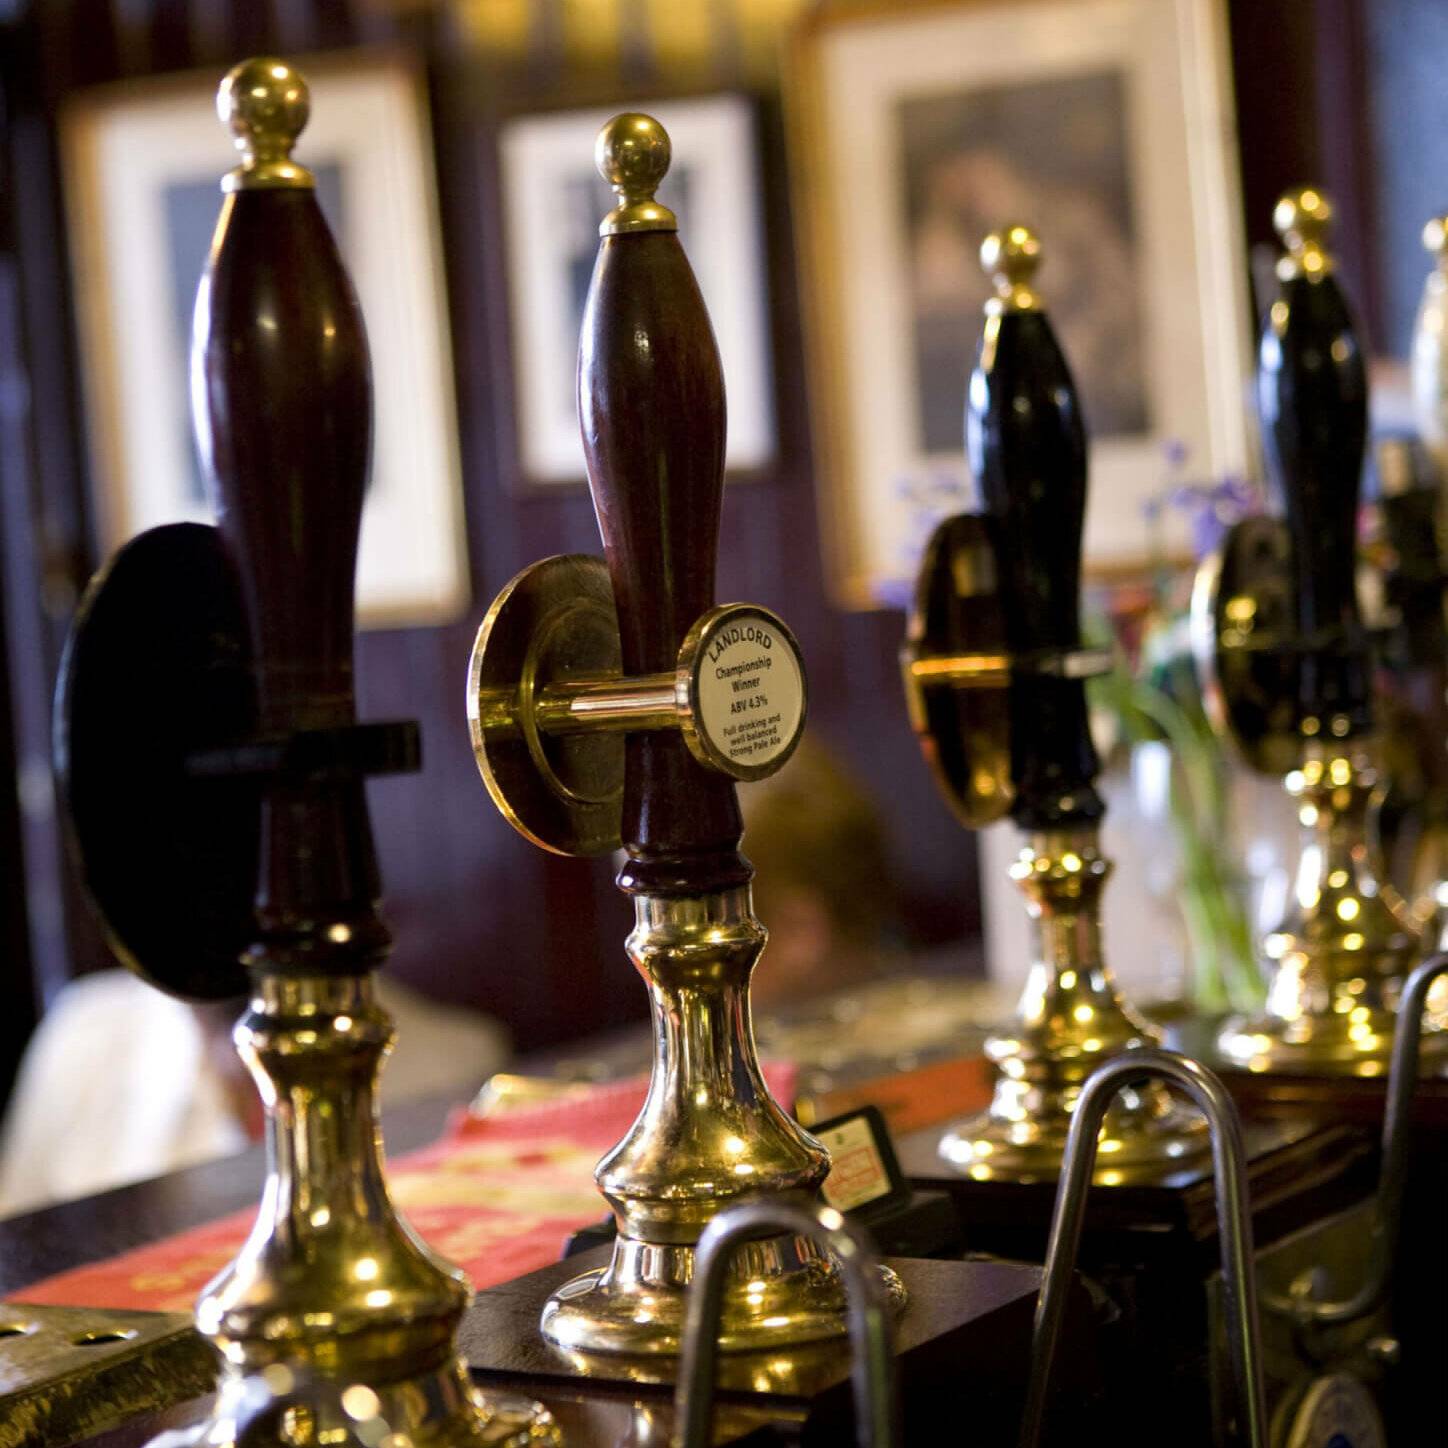 Landlords on tap in a York pub